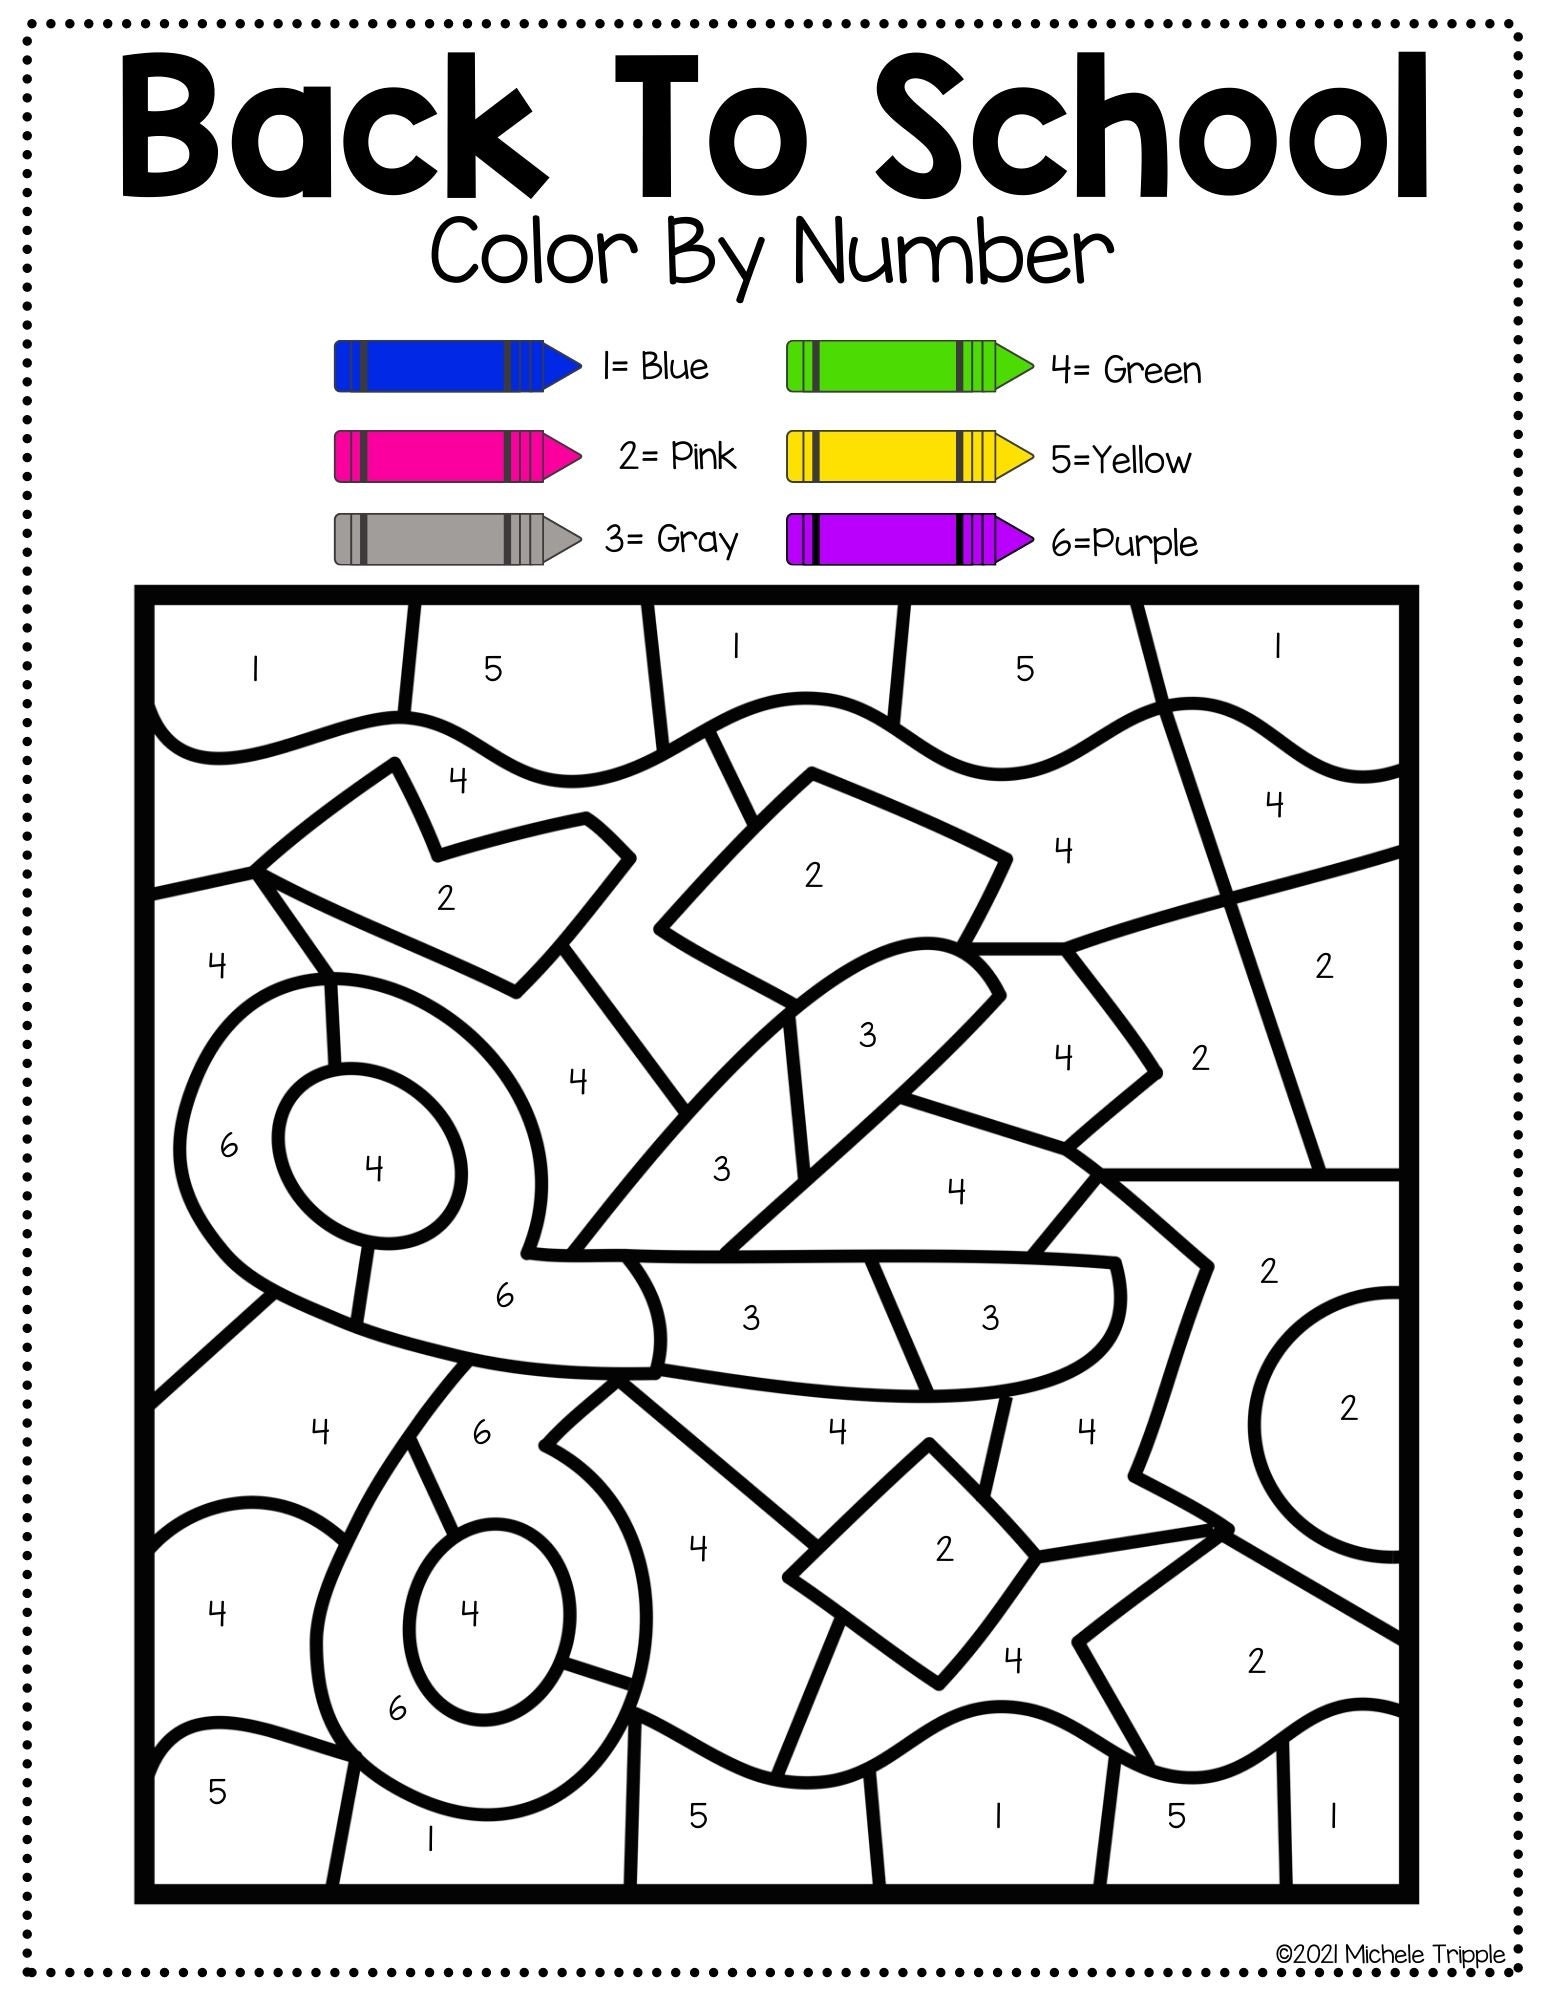 back-to-school-activity-color-by-number-activity-for-kids-etsy-espa-a